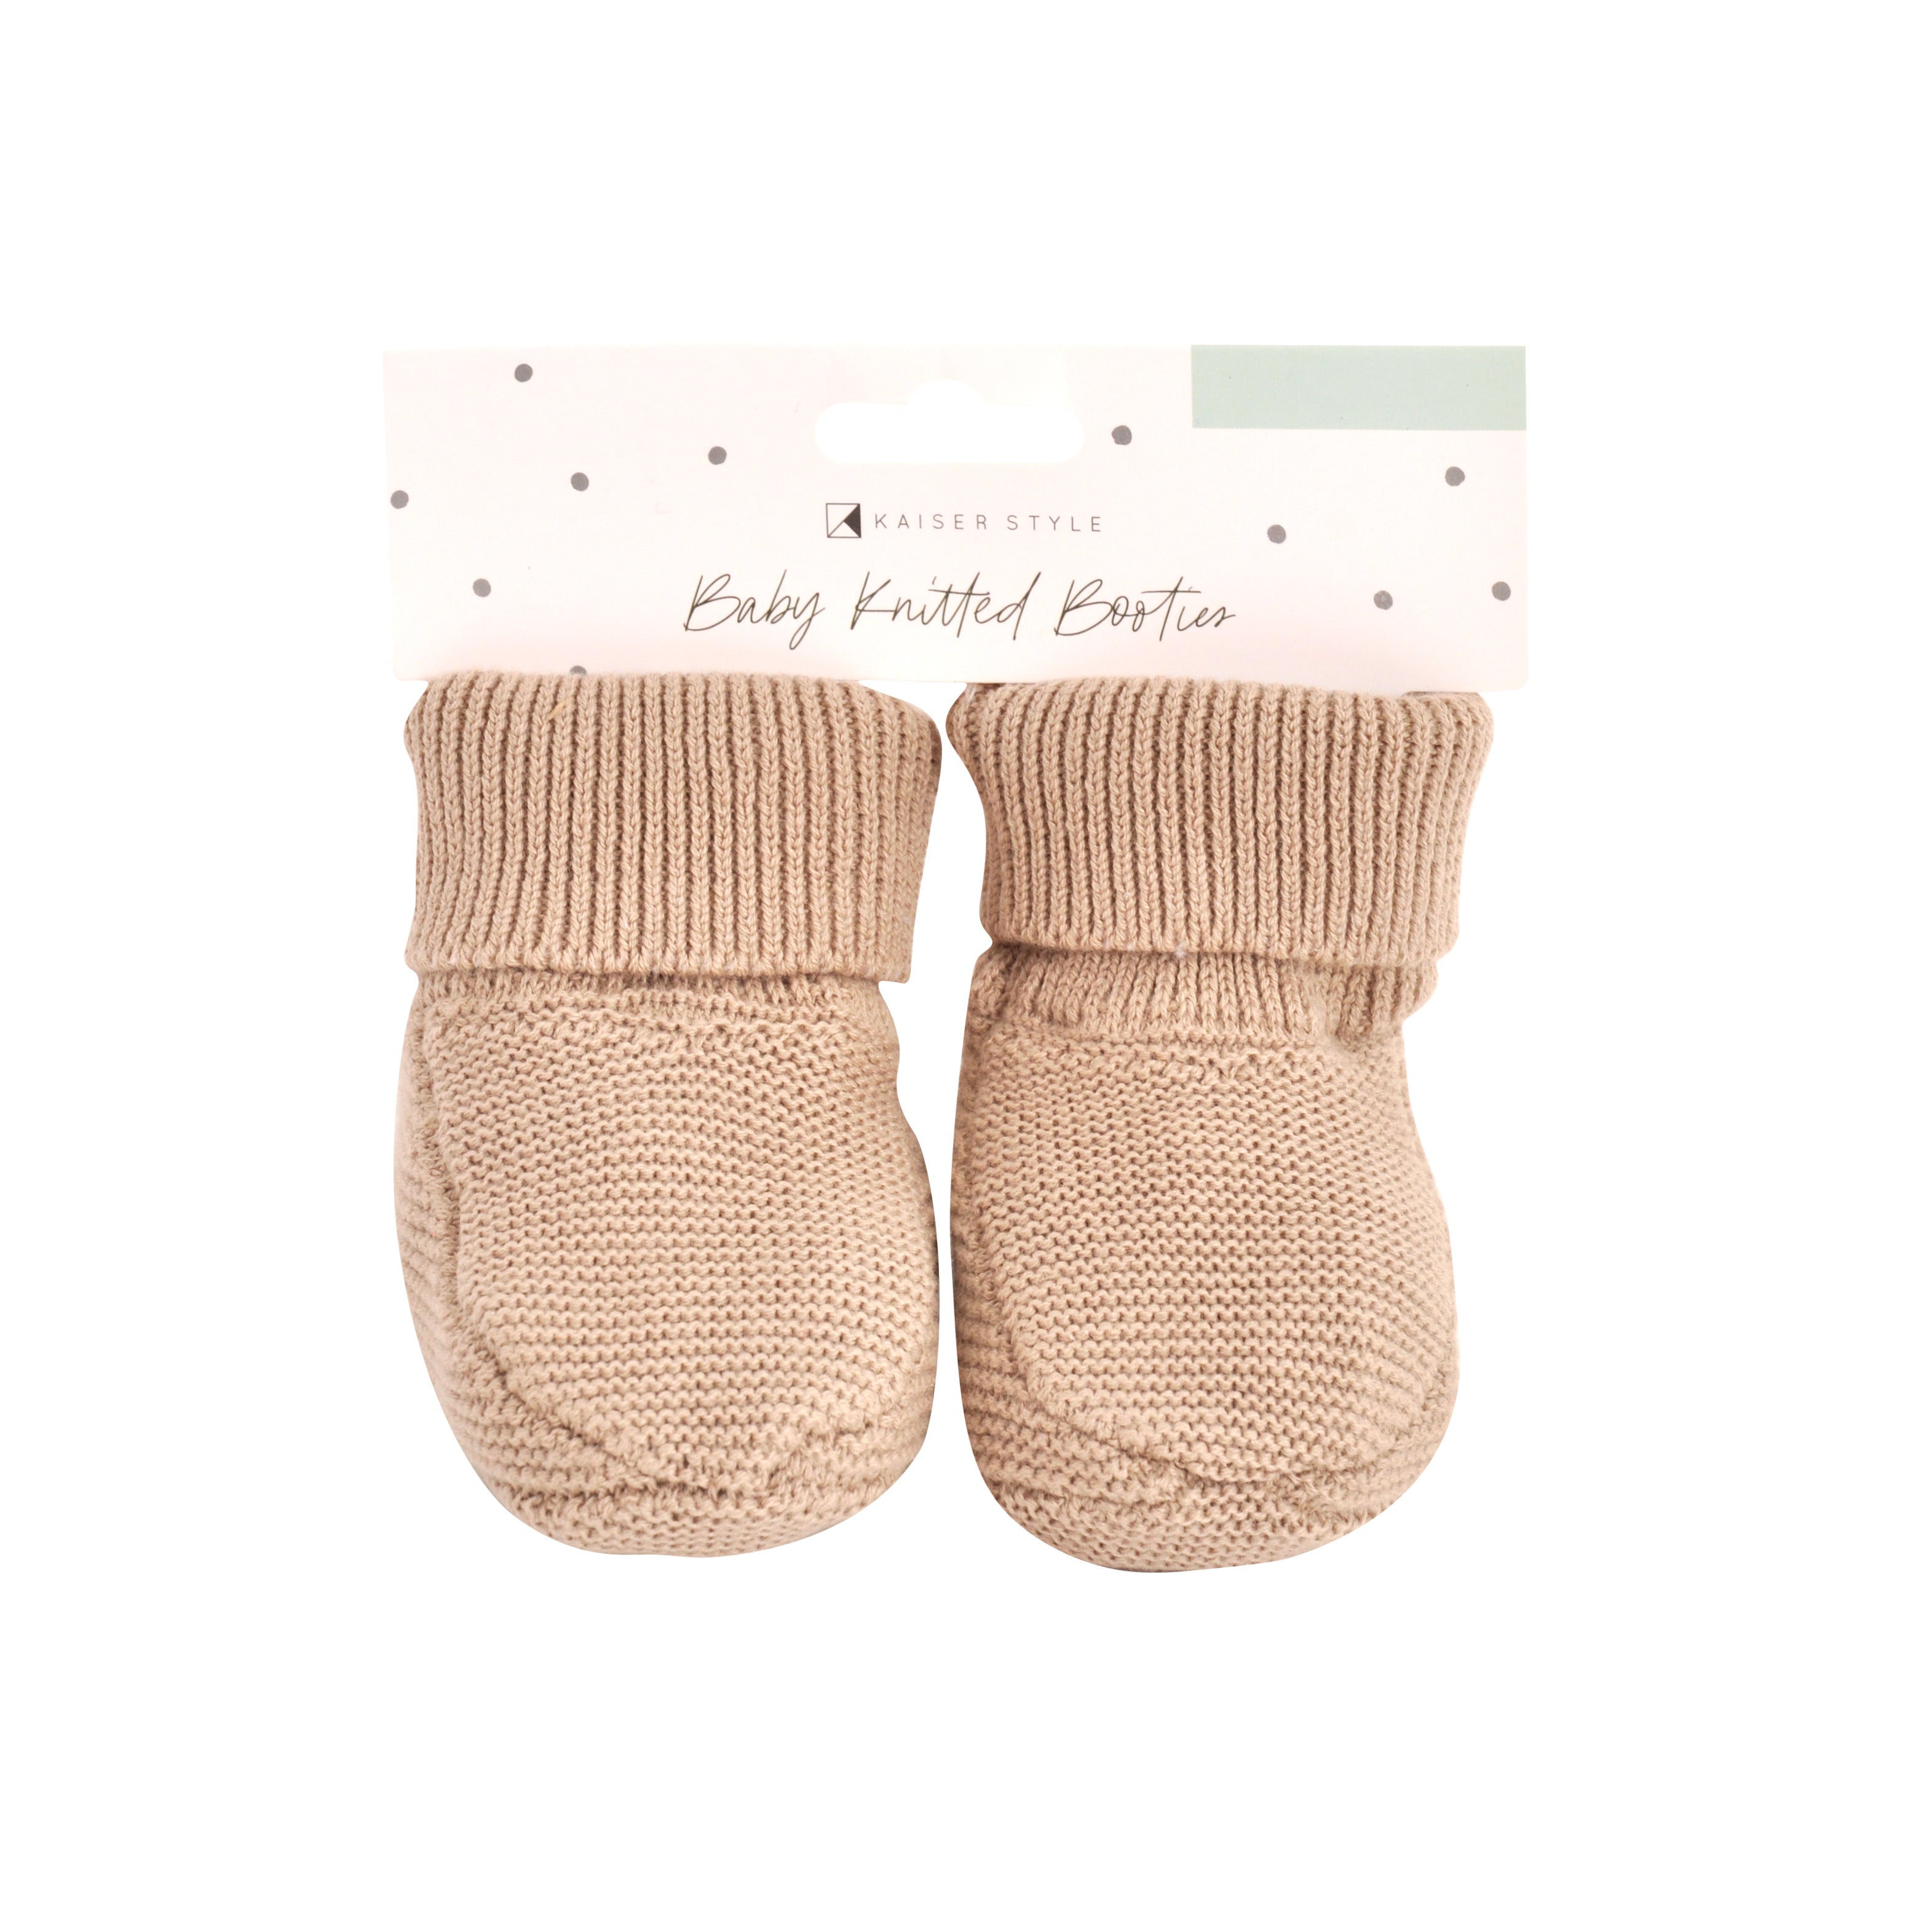 Baby Knitted Booties 0-6 Months - Natural